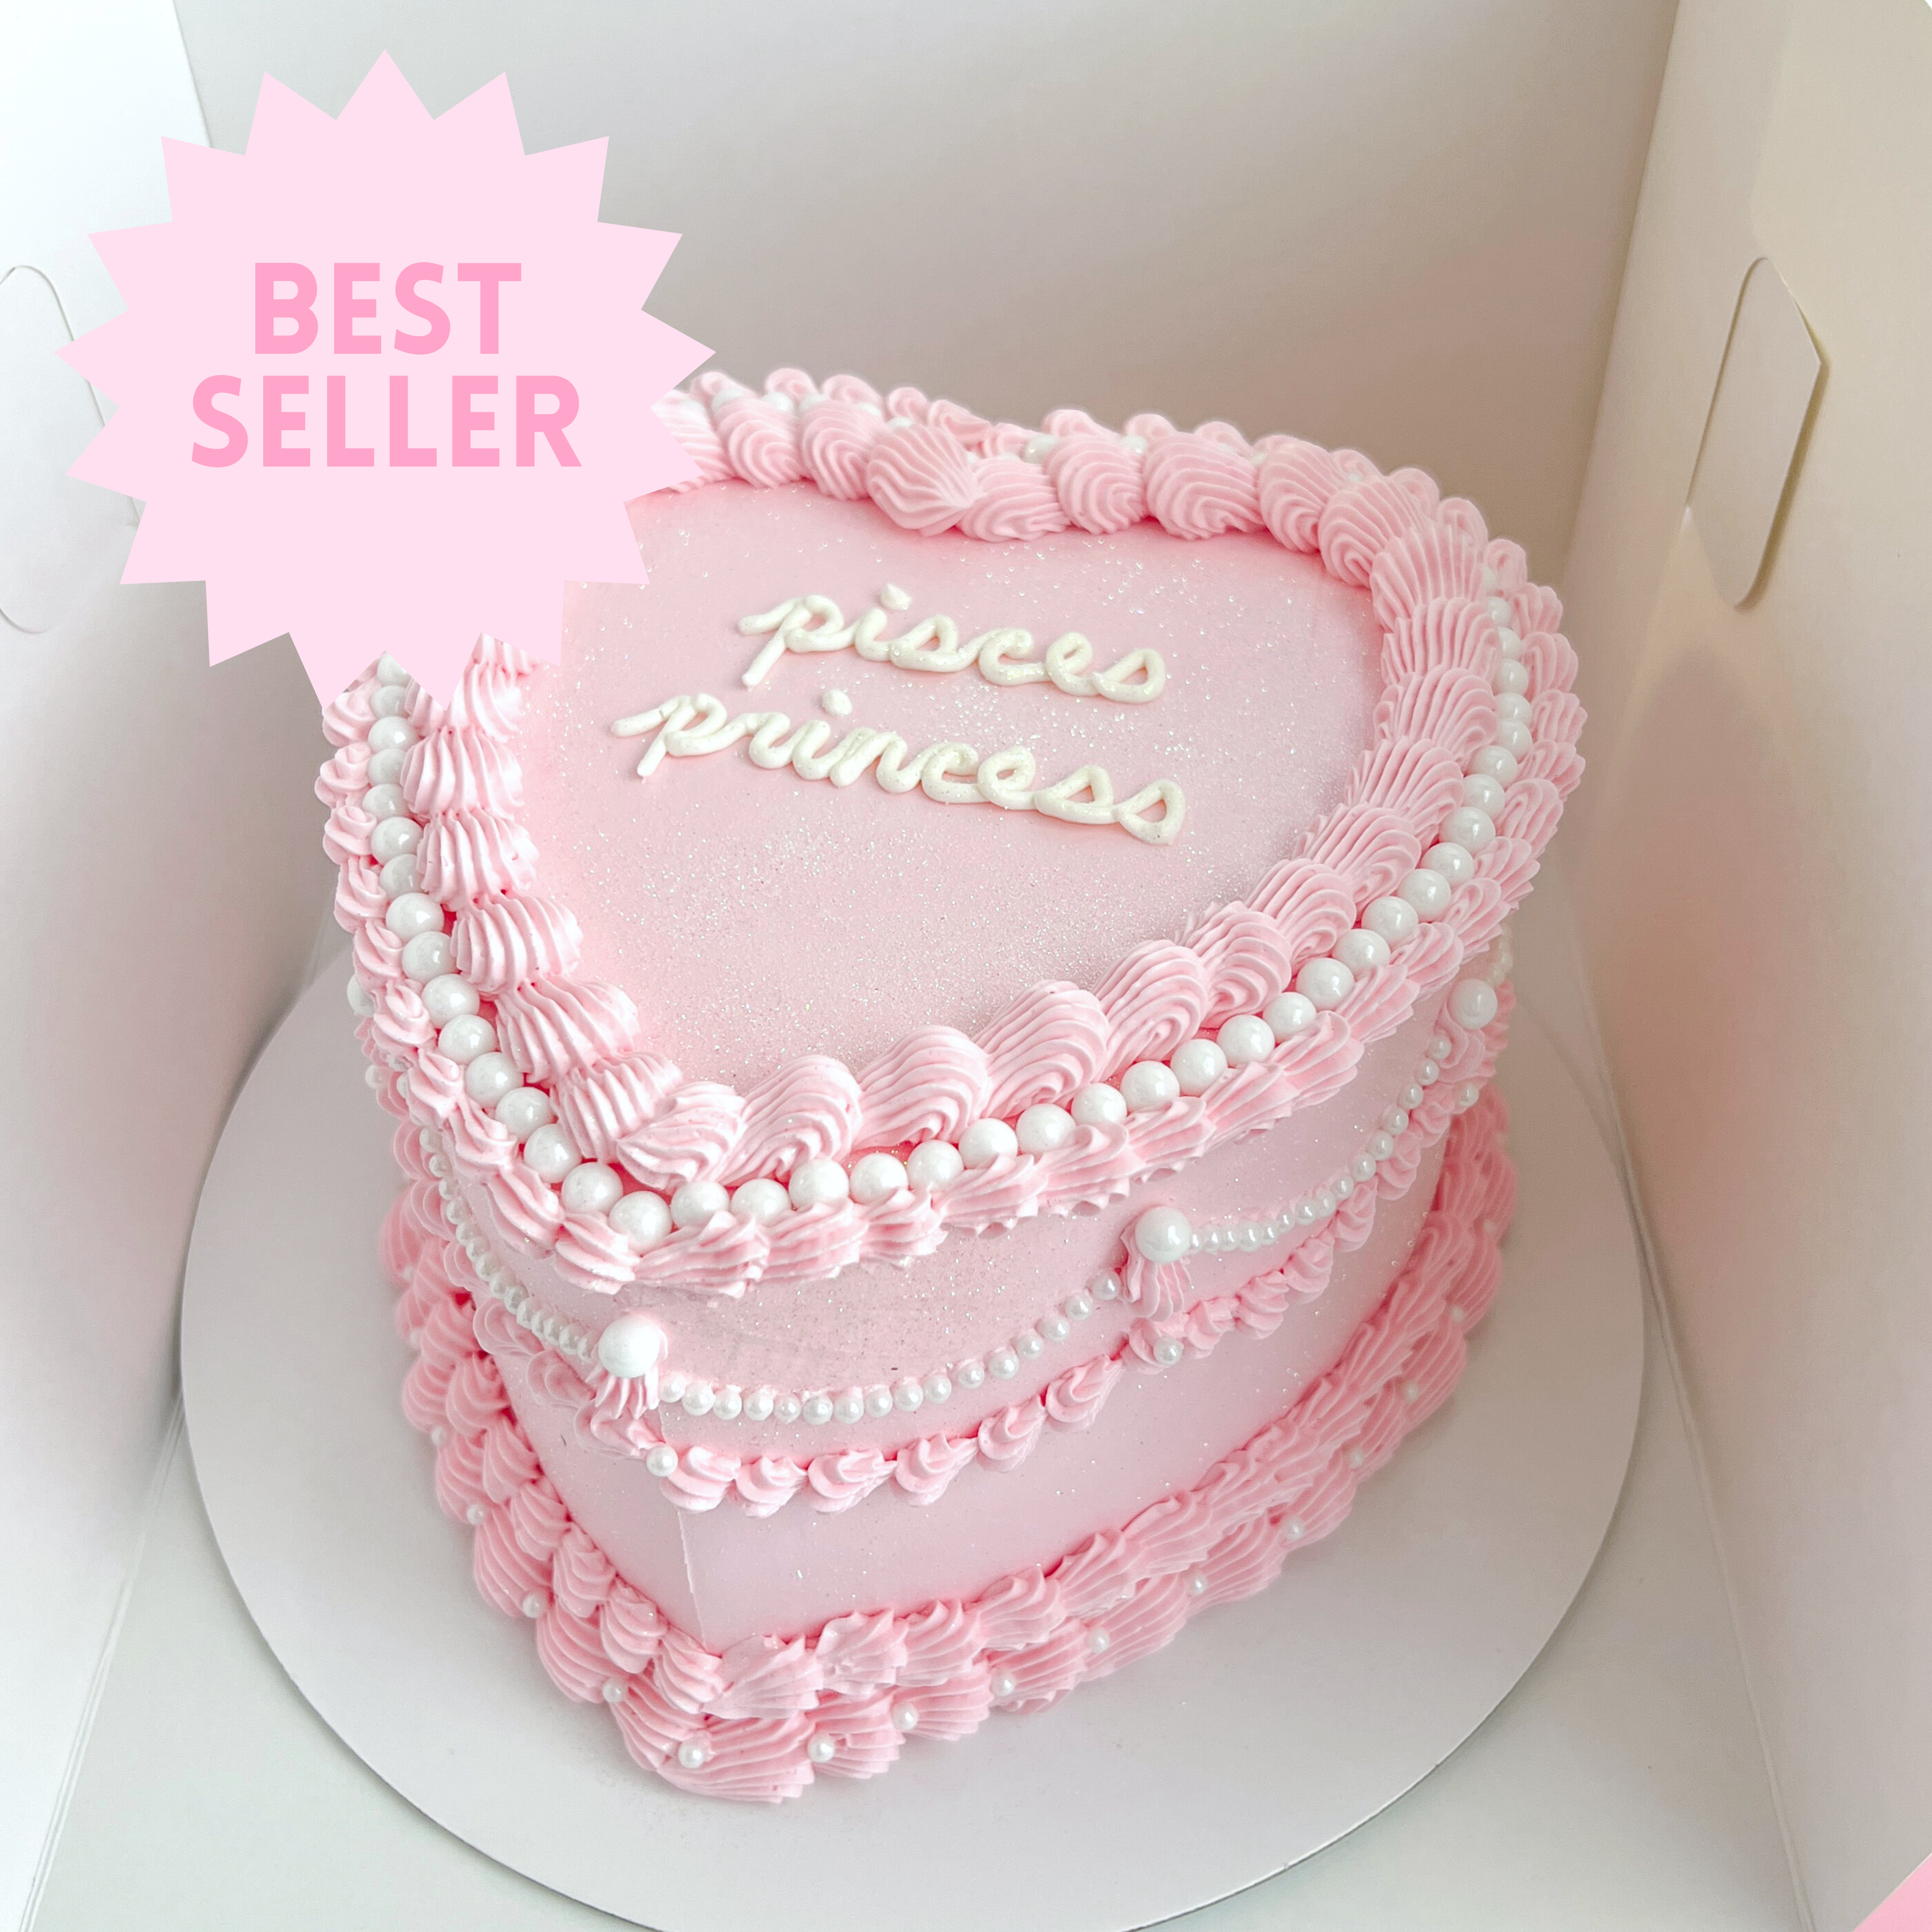 The Most Decadent Cakes on Earth  Pretty birthday cakes Vintage cake  Vintage birthday cakes